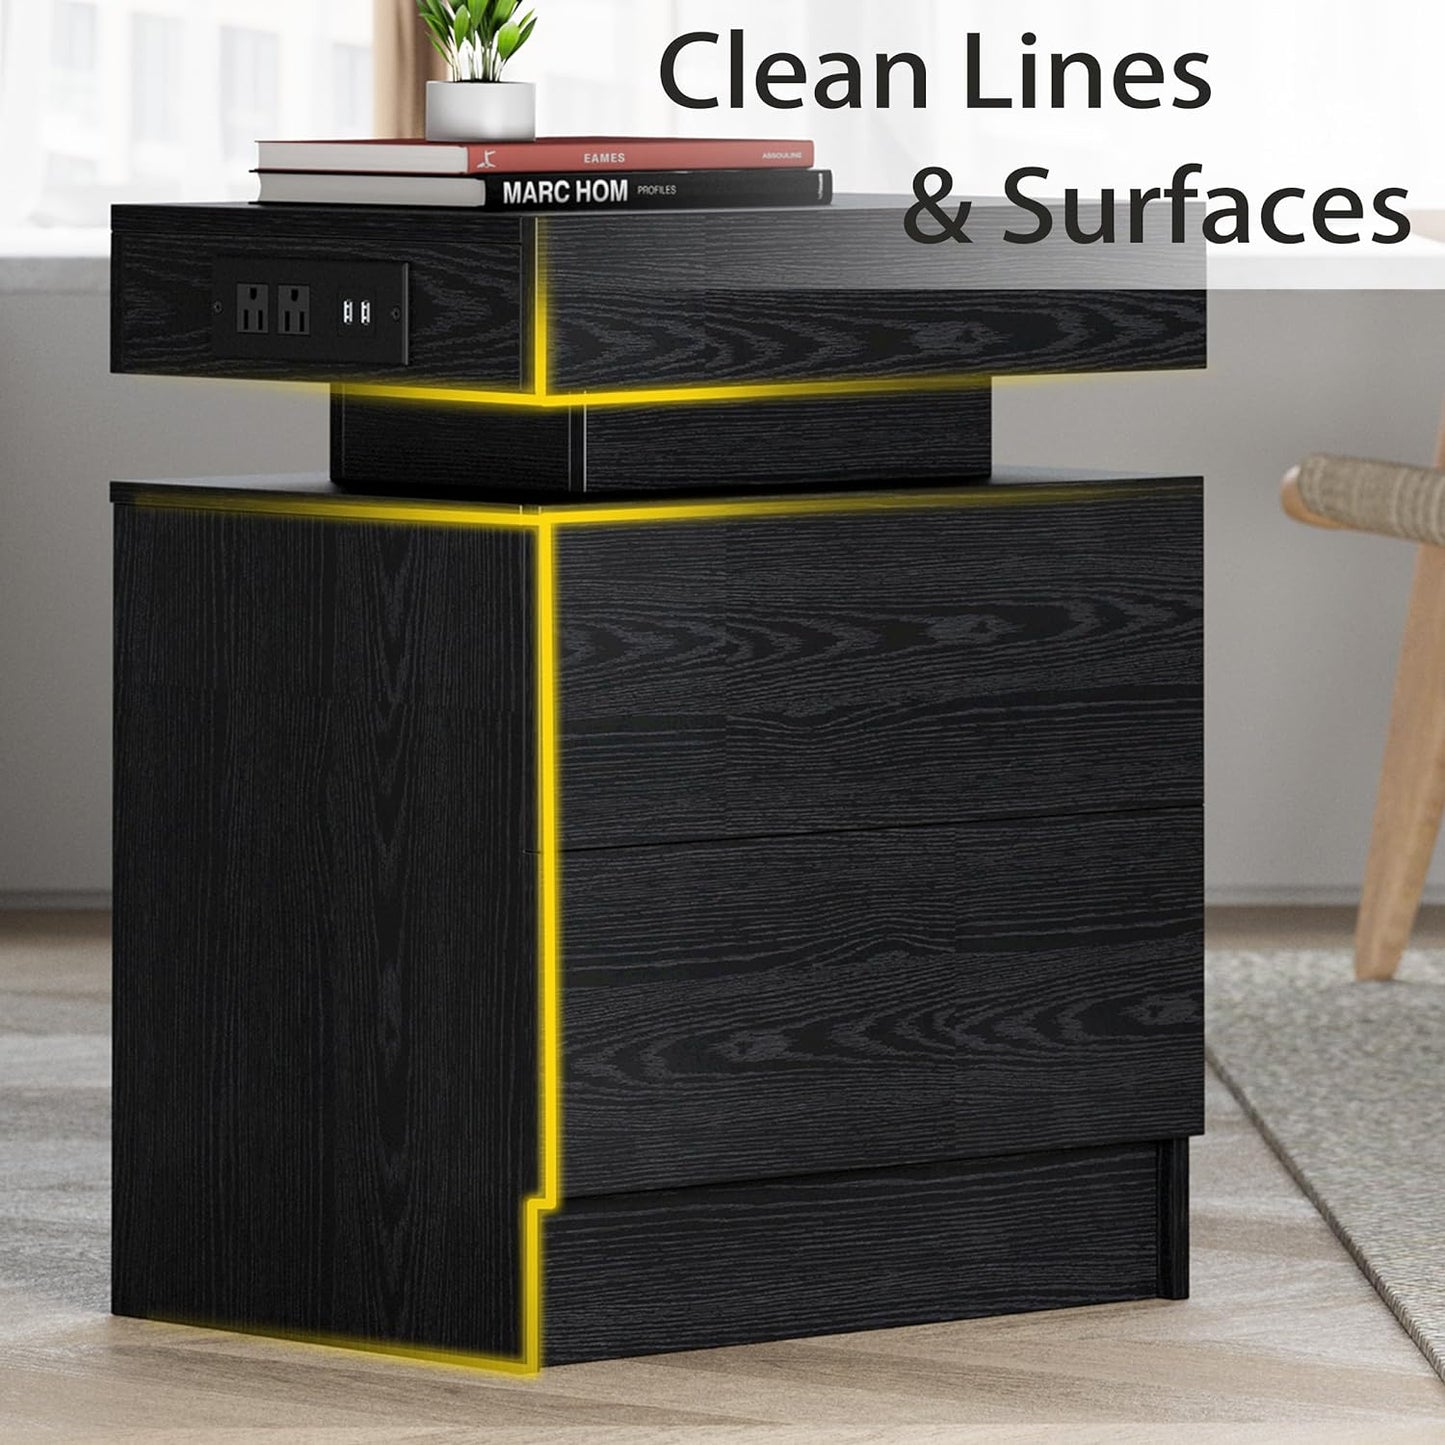 LED Night Stand with Charging Station